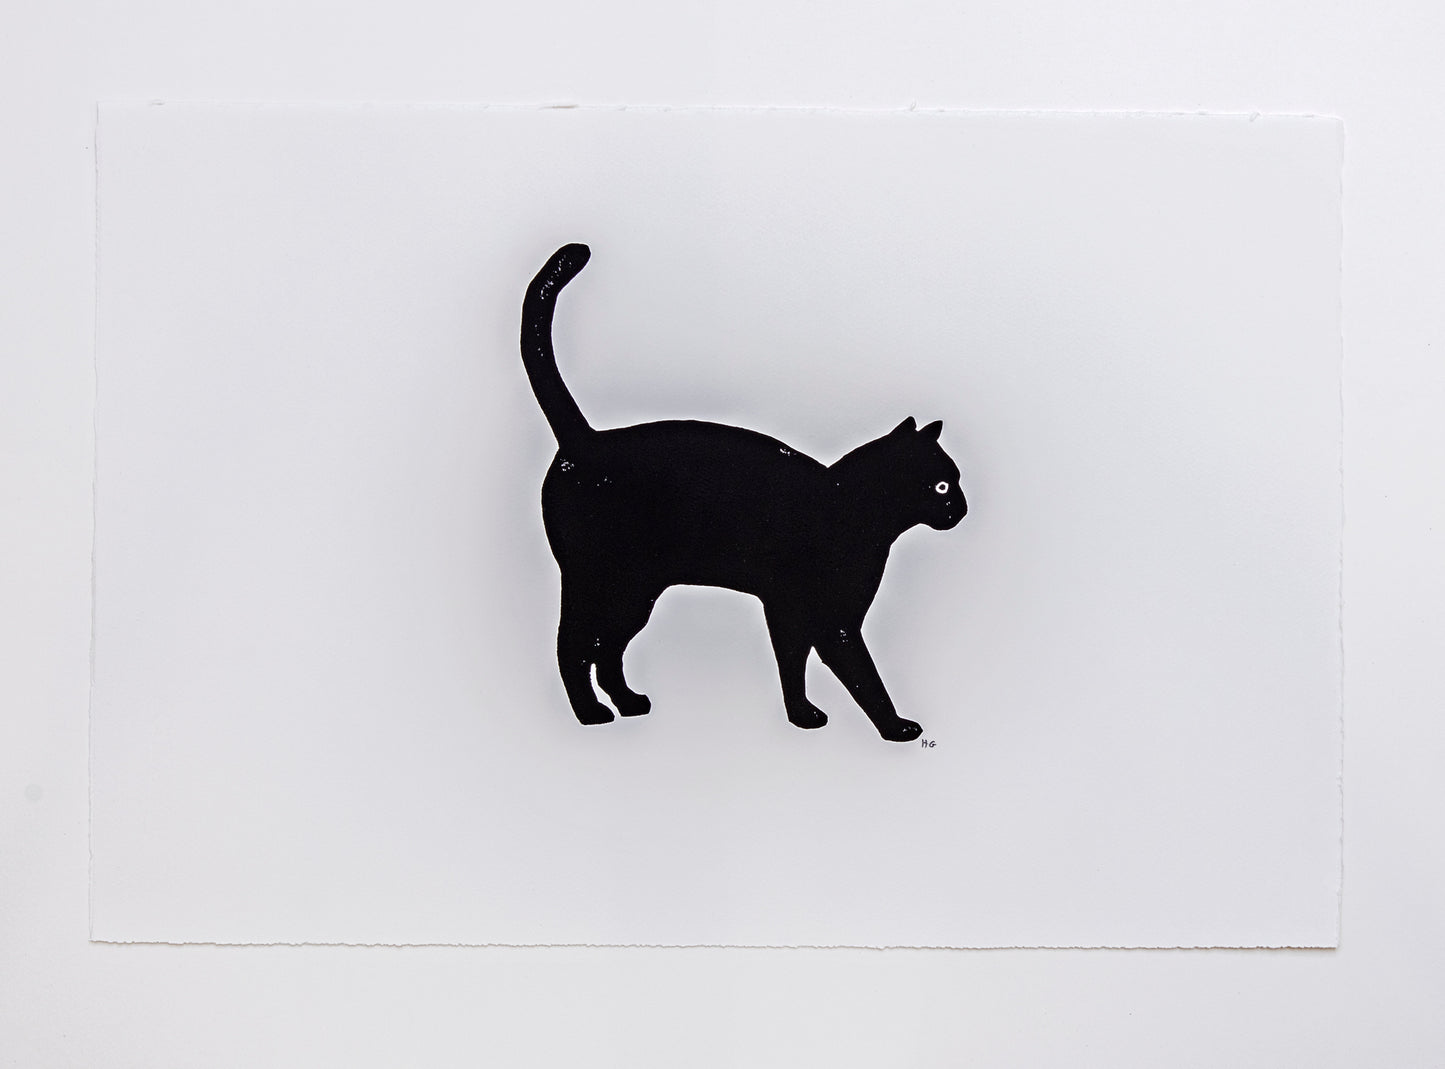 Black Cat With Arched Back